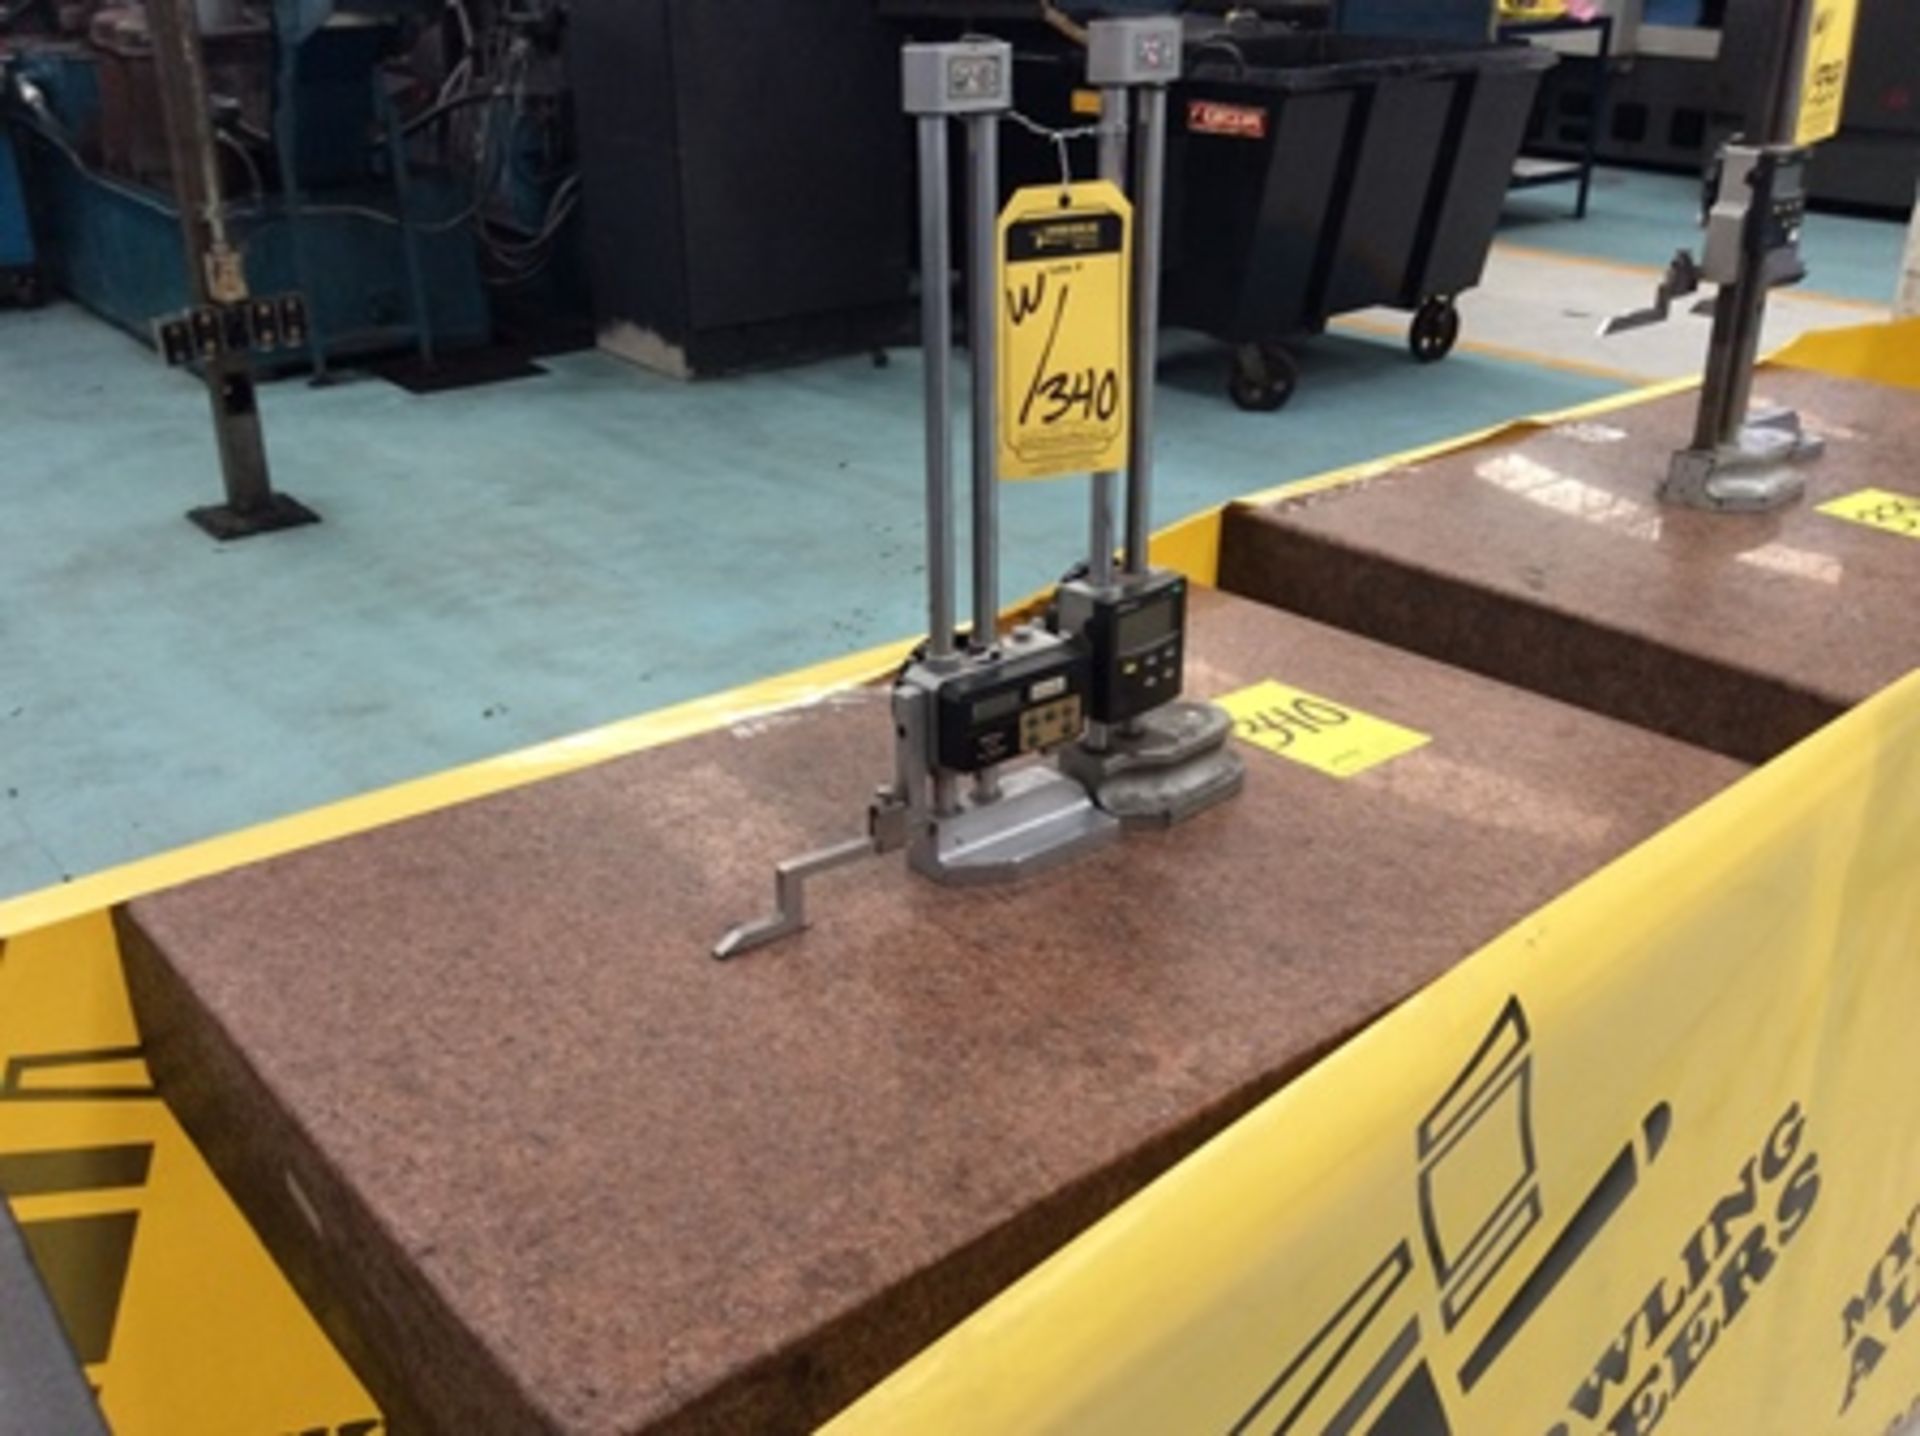 36 "x 24" granite table includes two digital height calipers by Mitutoyo brand. … - Bild 3 aus 6